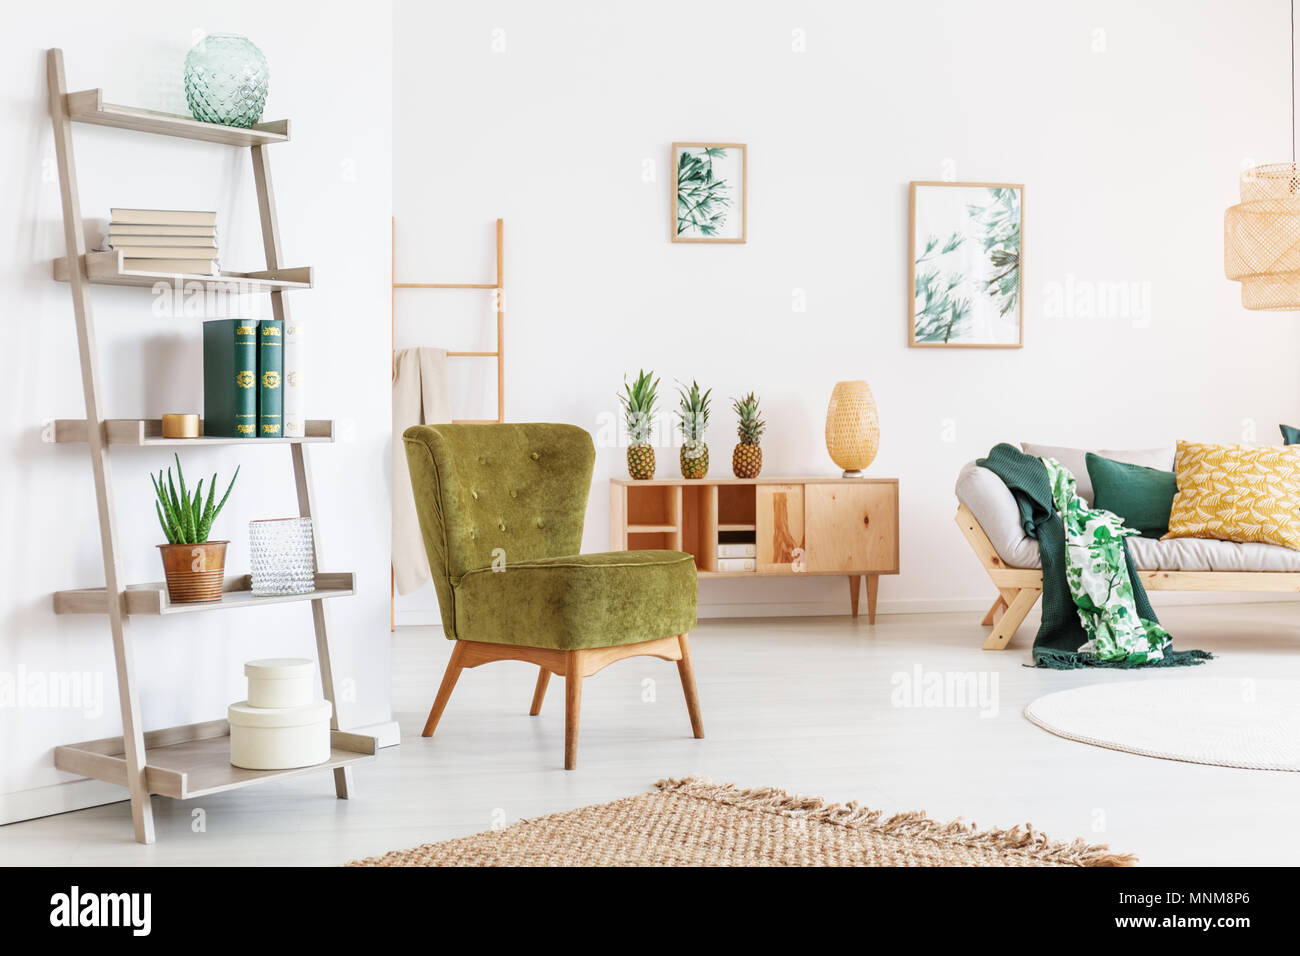 Pear green chair and yellow pillow on beige sofa in cozy room with accessories on wooden shelf Stock Photo